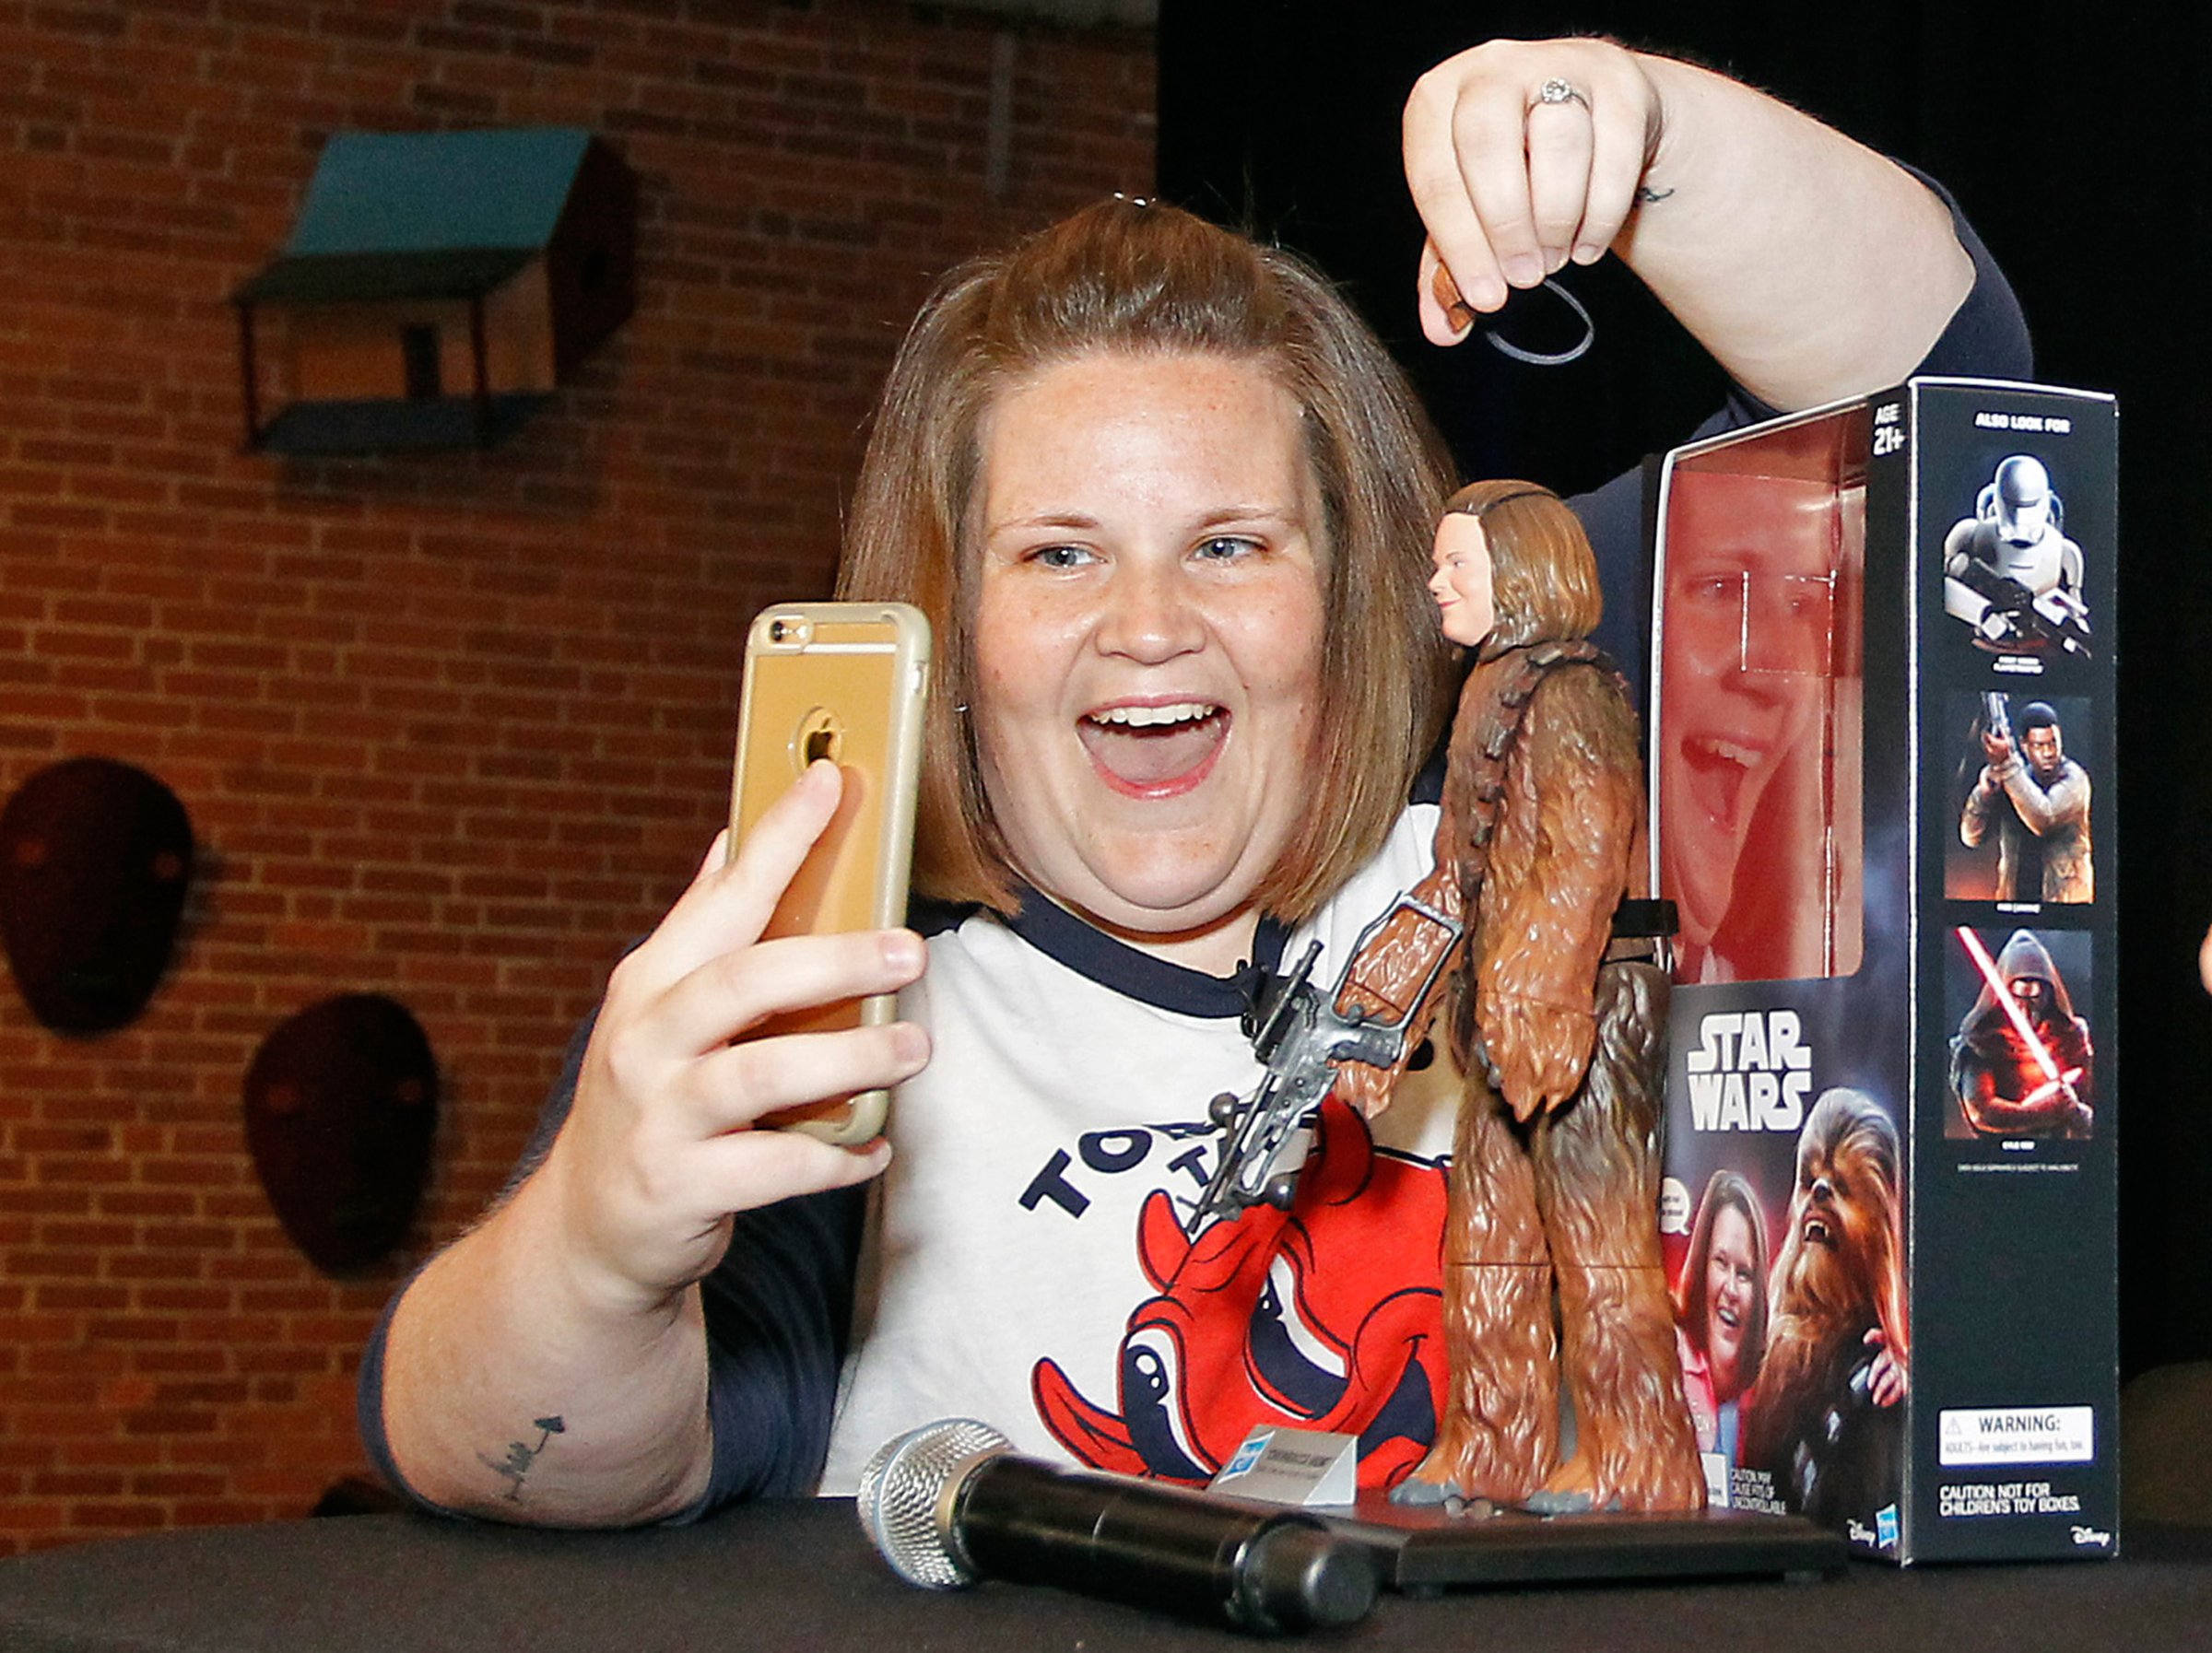 Candace Payne, also known as Chewbacca Mom, streams a Facebook Live video with her custom Chewbacca Mom action figure during a meet and greet at Hasbro HQ in Pawtucket, R.I., on June 17, 2016.